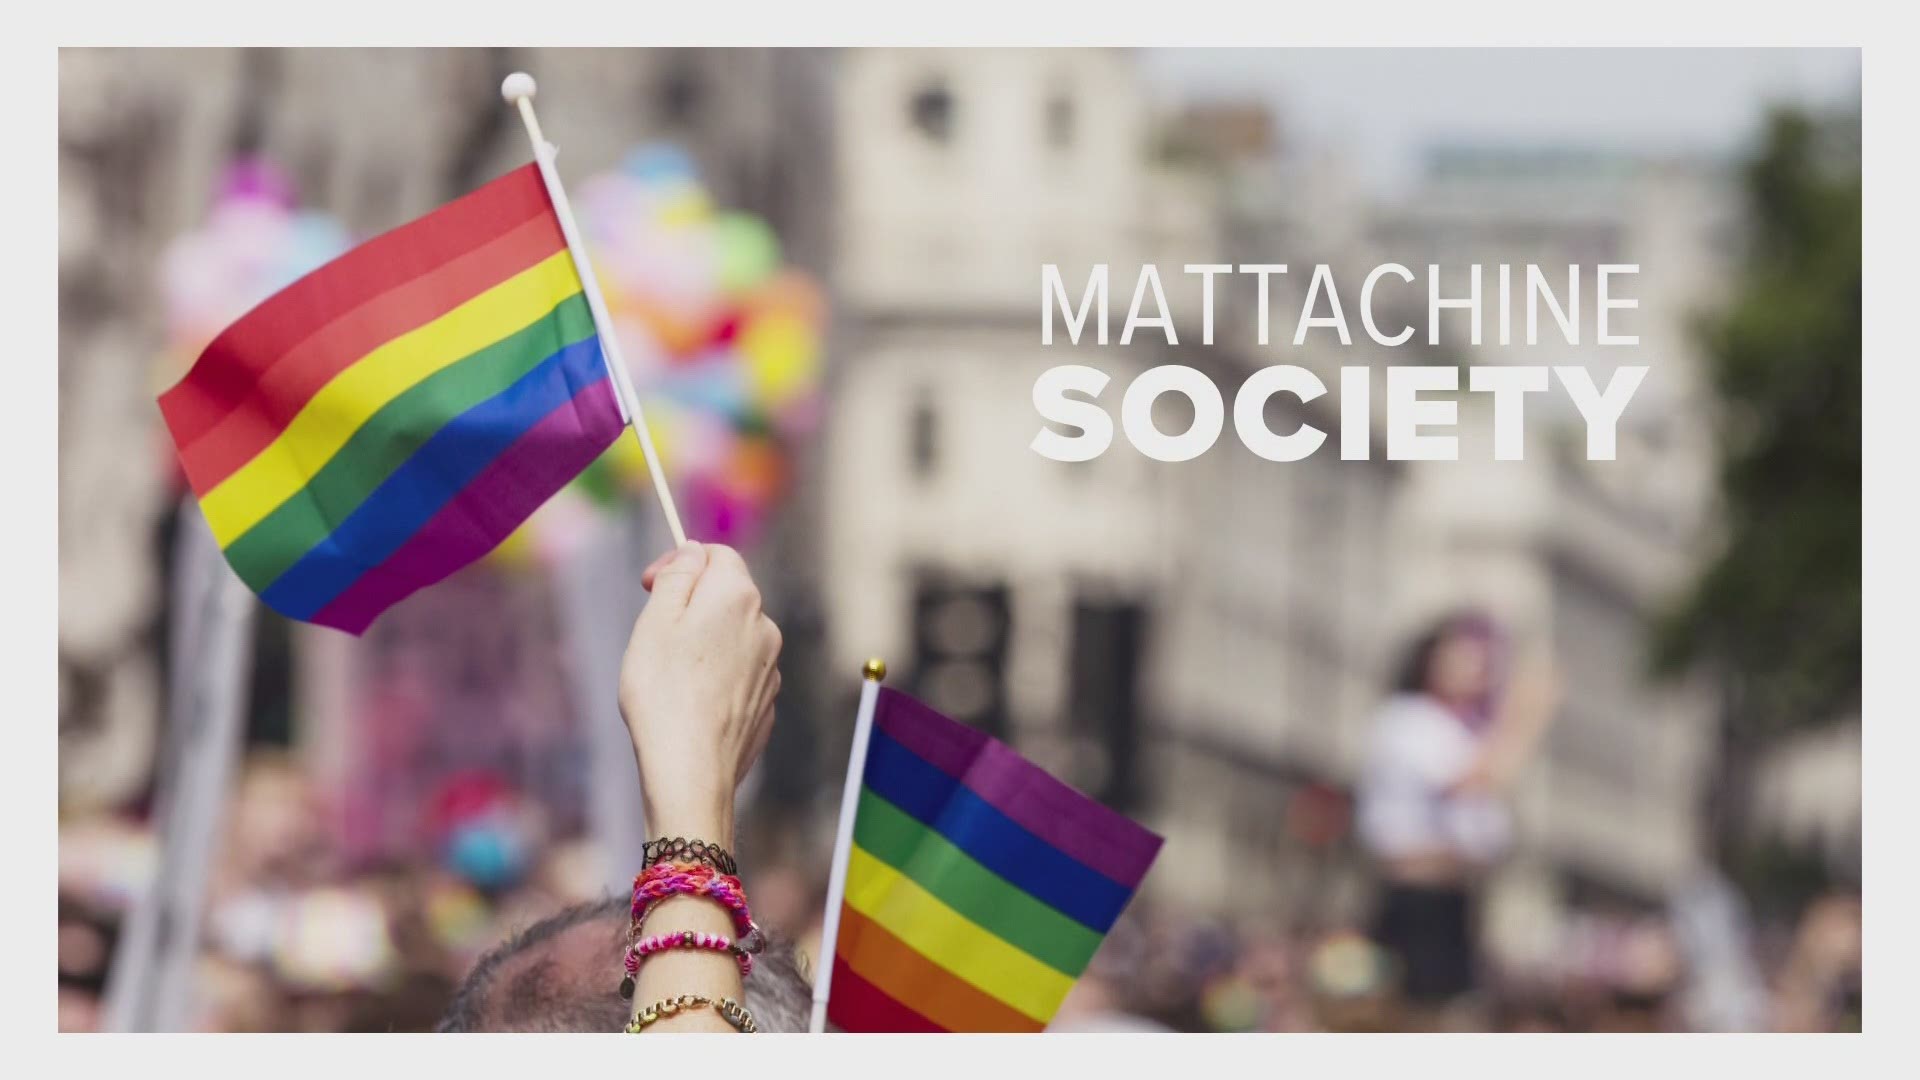 Harry Hay gathered a group of gay men together in Los Angeles in 1950. They called themselves the Mattachine Society.